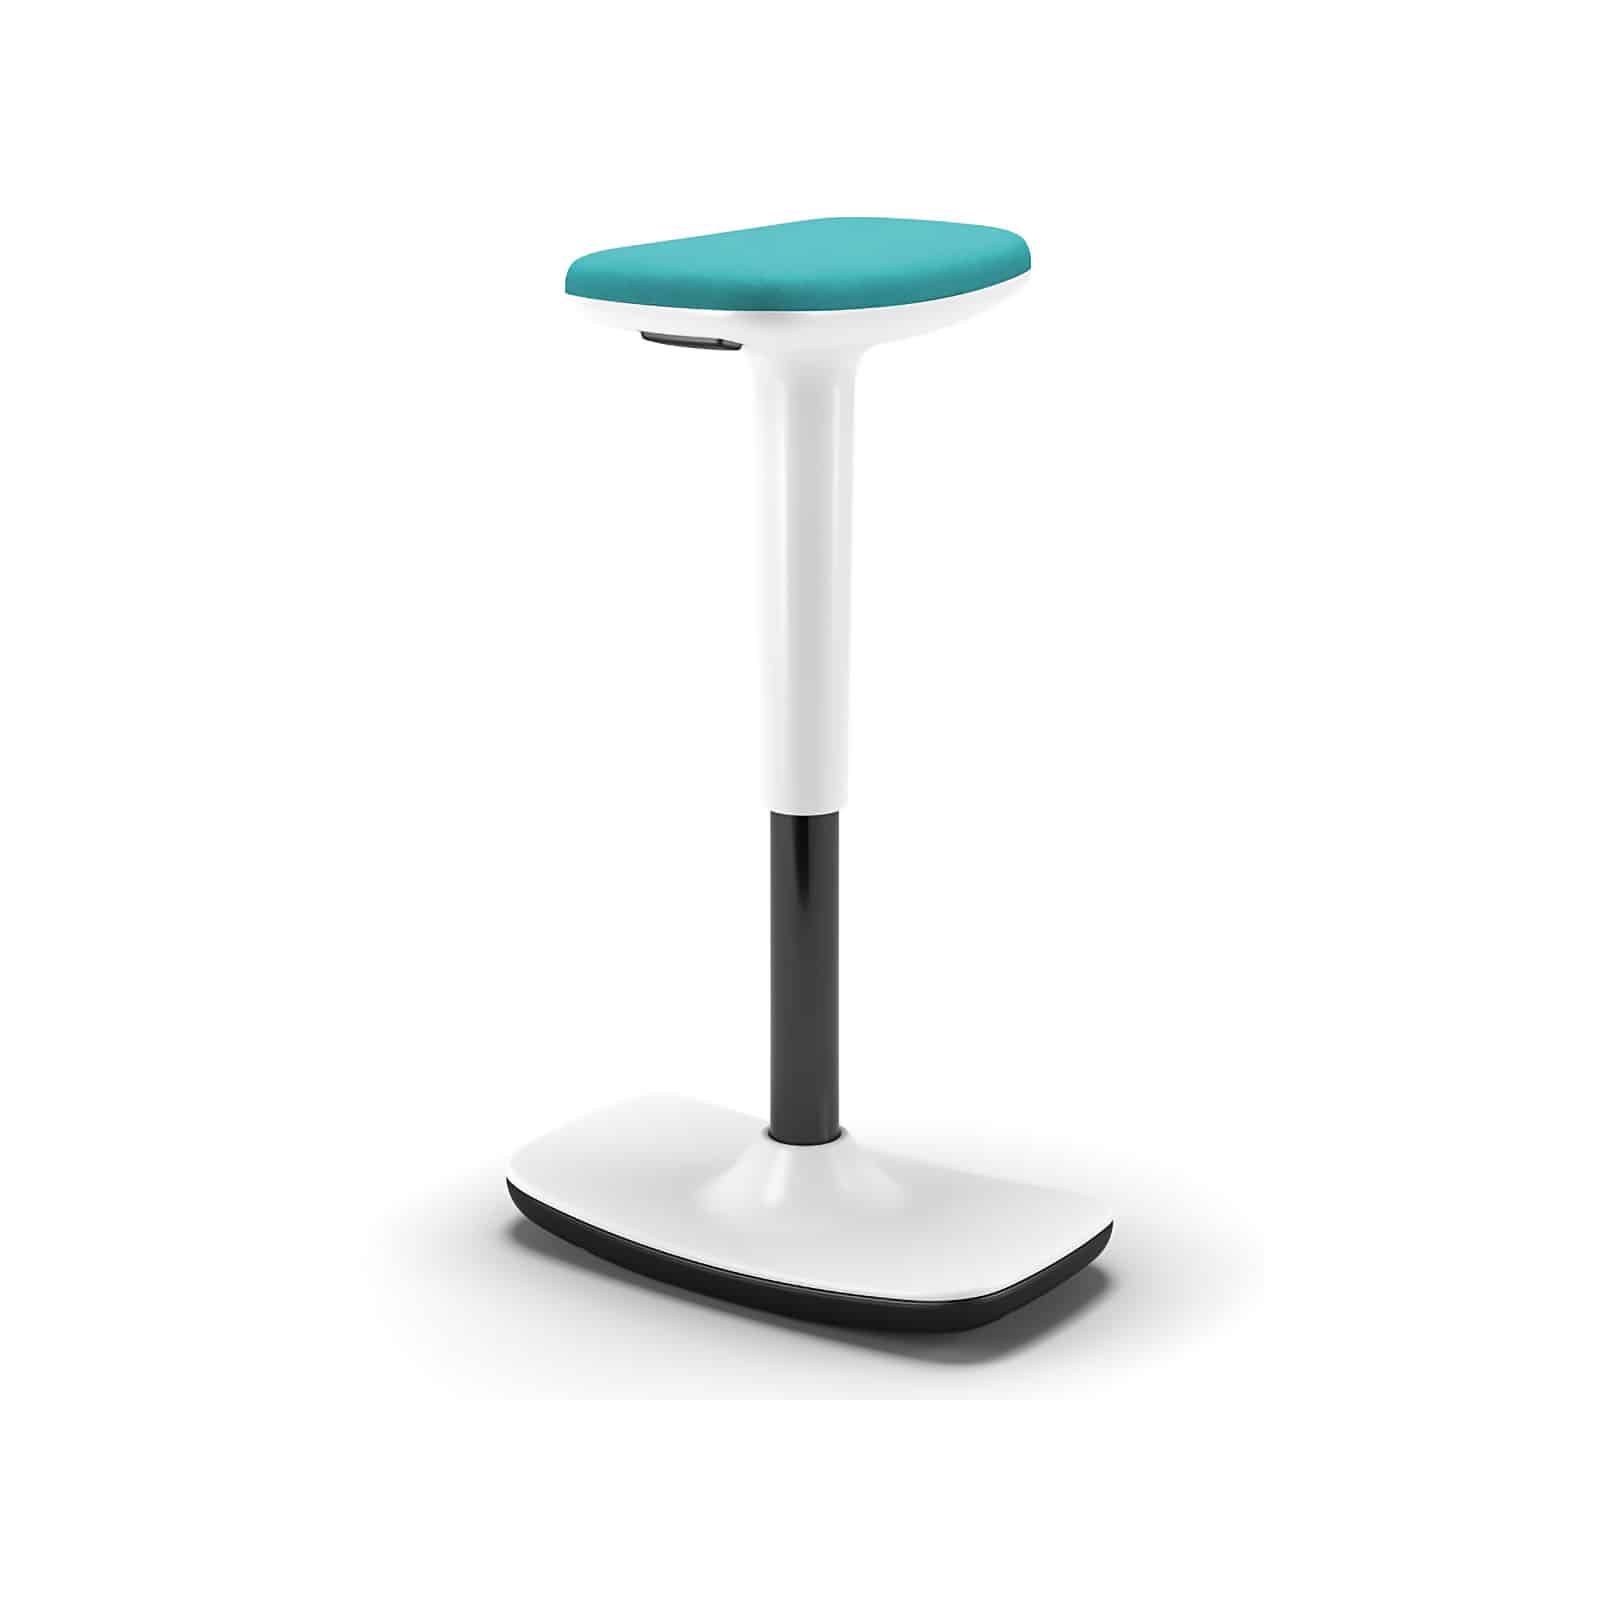 A motion stool with a curved rocker-shaped base